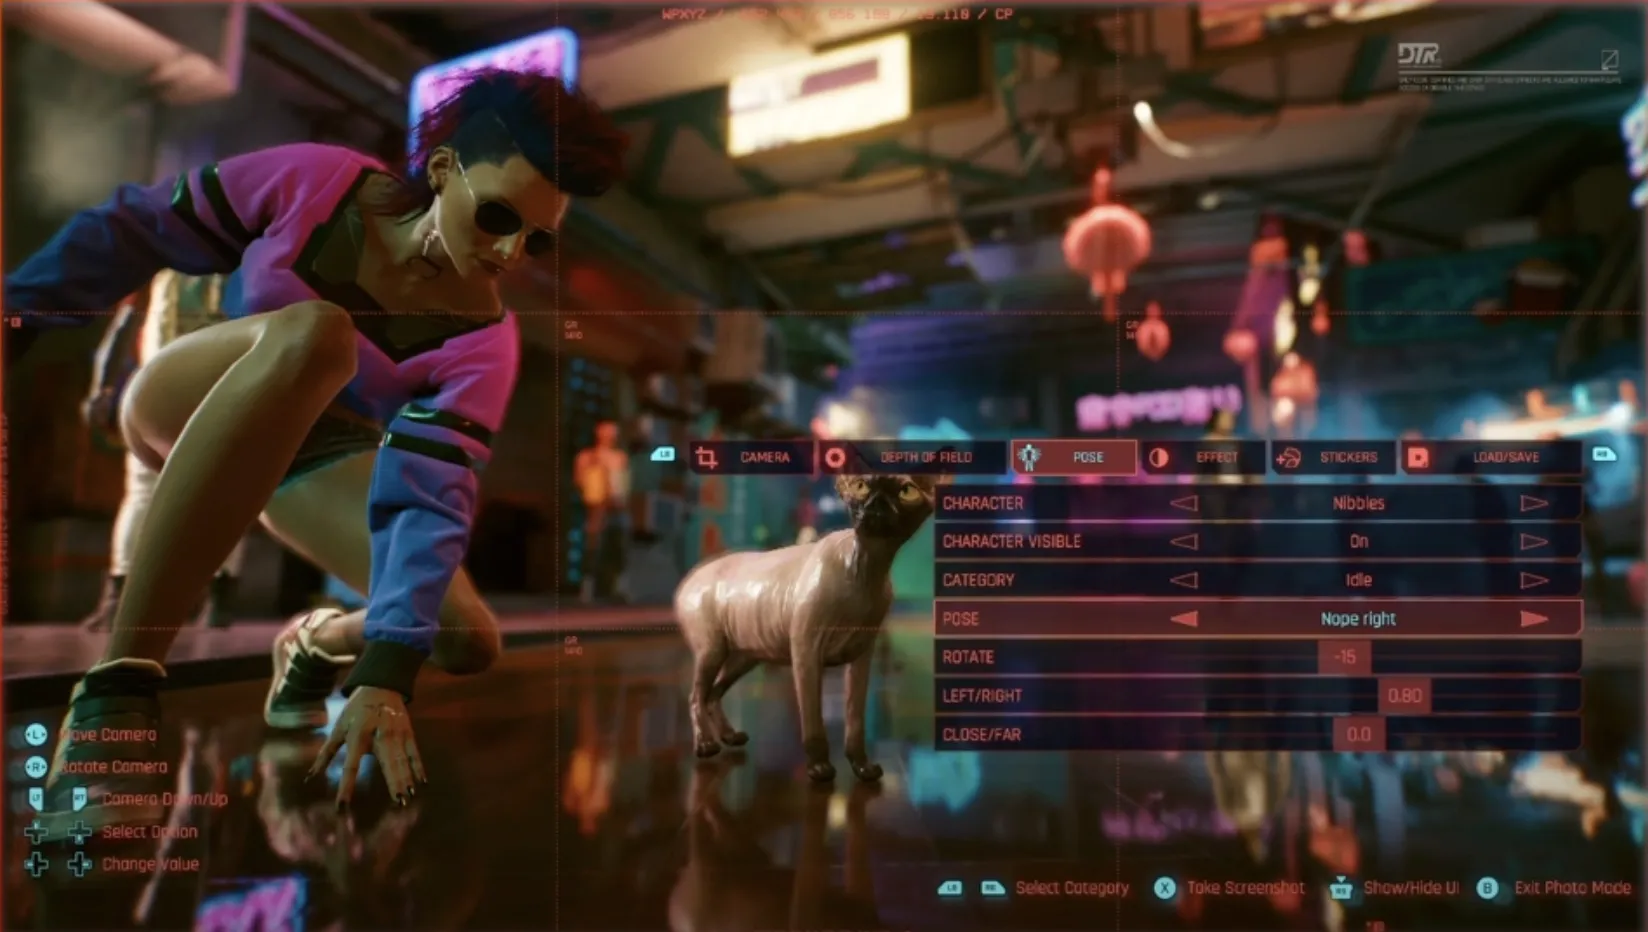 Cyberpunk 2077 update adds transmog and cat pictures